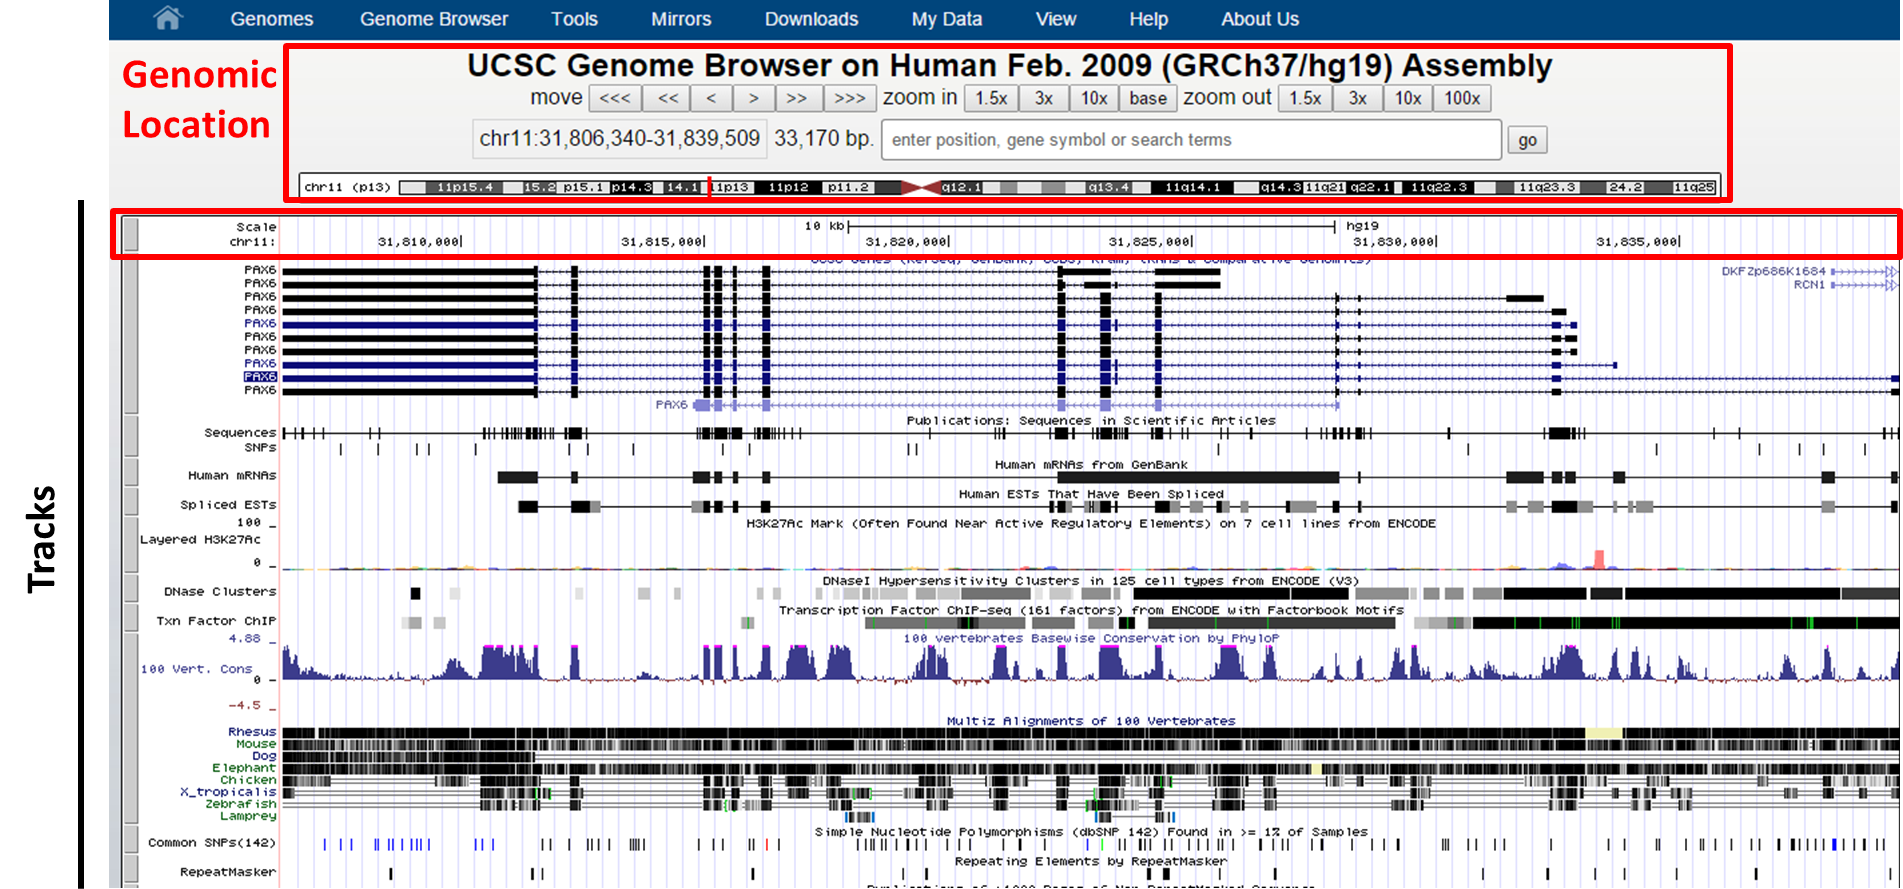 UCSC Genome Browser interface